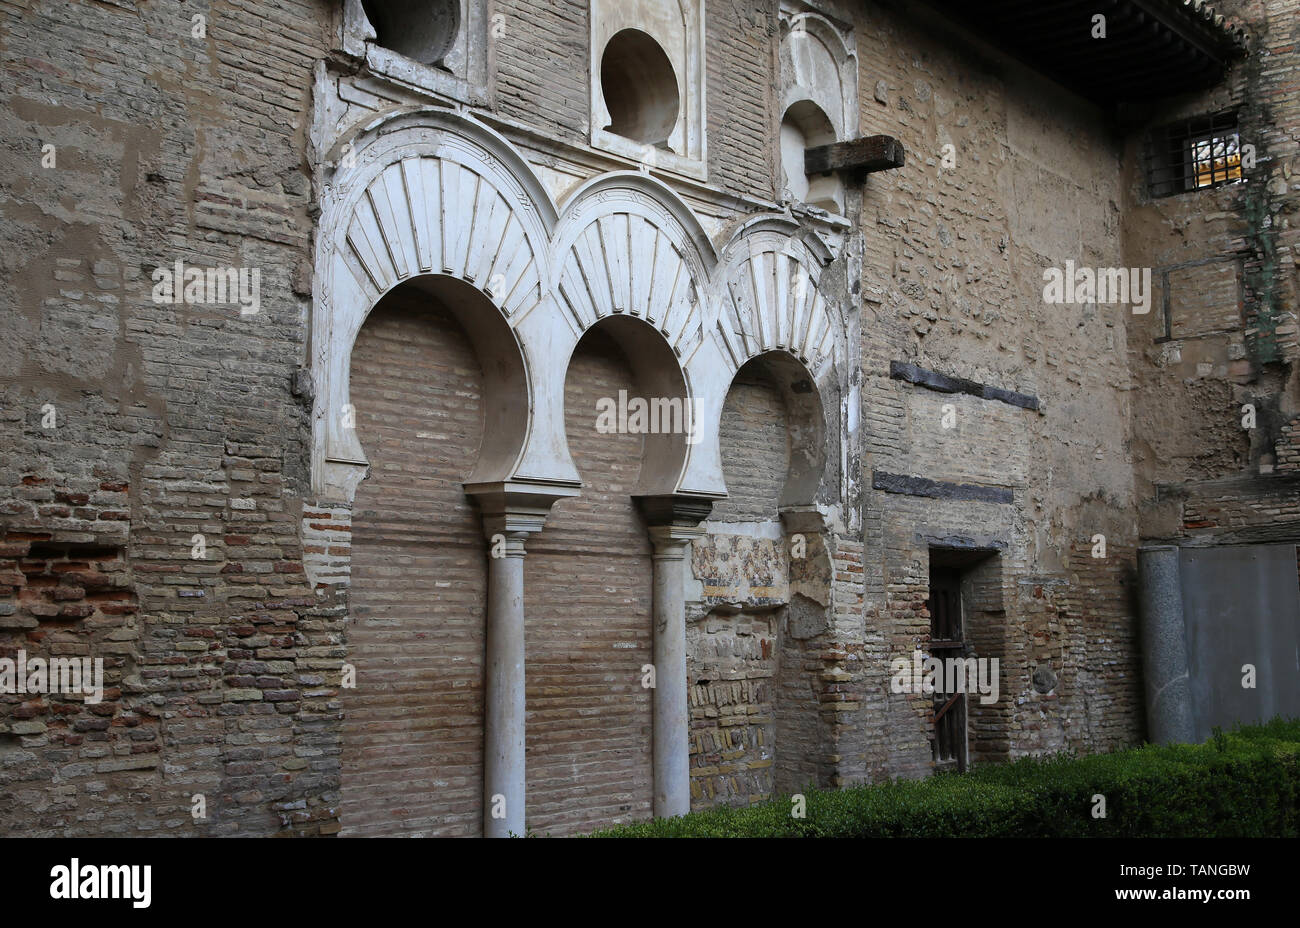 Spain. Seville. Alcazar of Seville. Patio del Yeso, 12th century. Part of old Almohad palace. North portico. Stock Photo